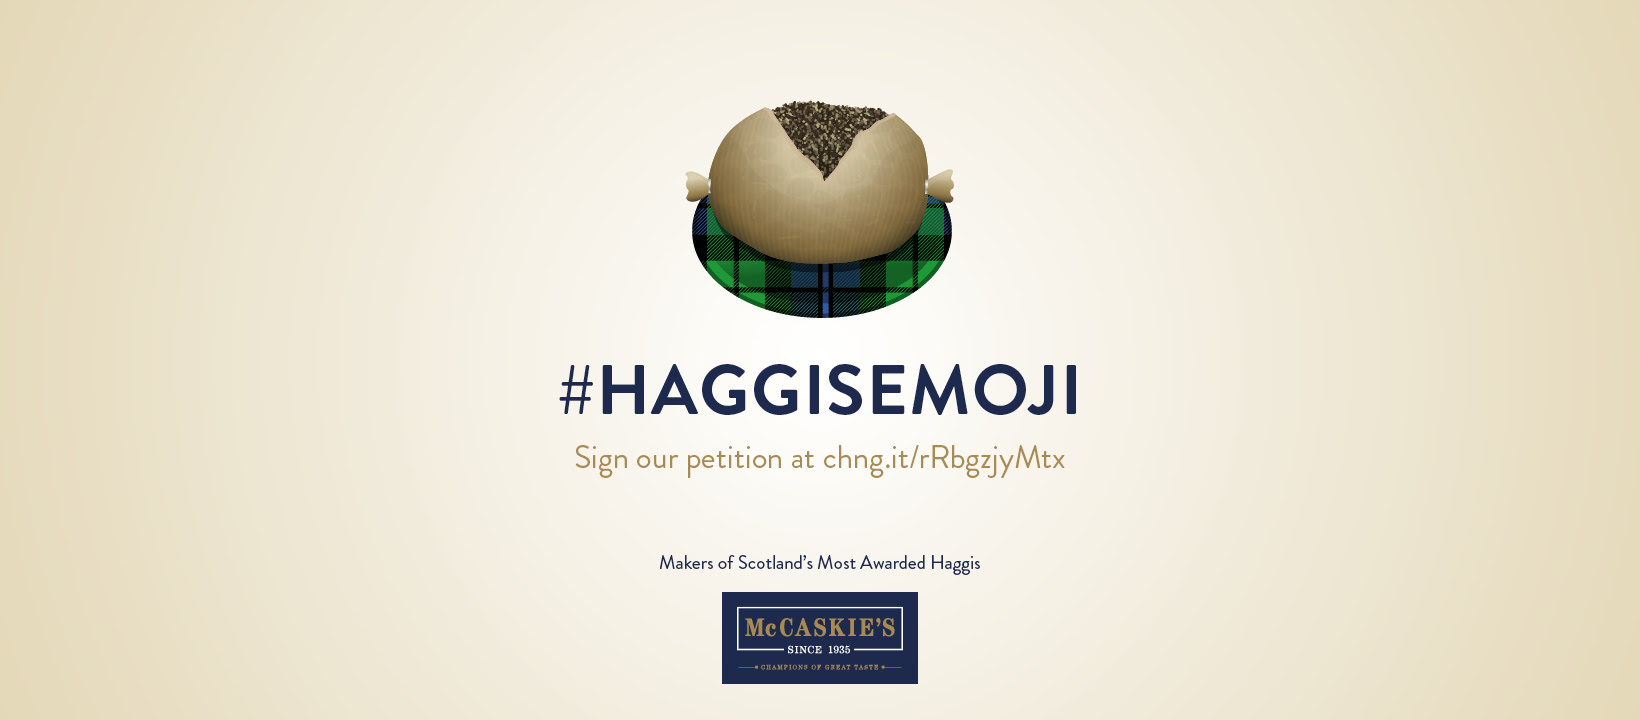 And finally… industry urges Scots to back campaign for haggis emoji